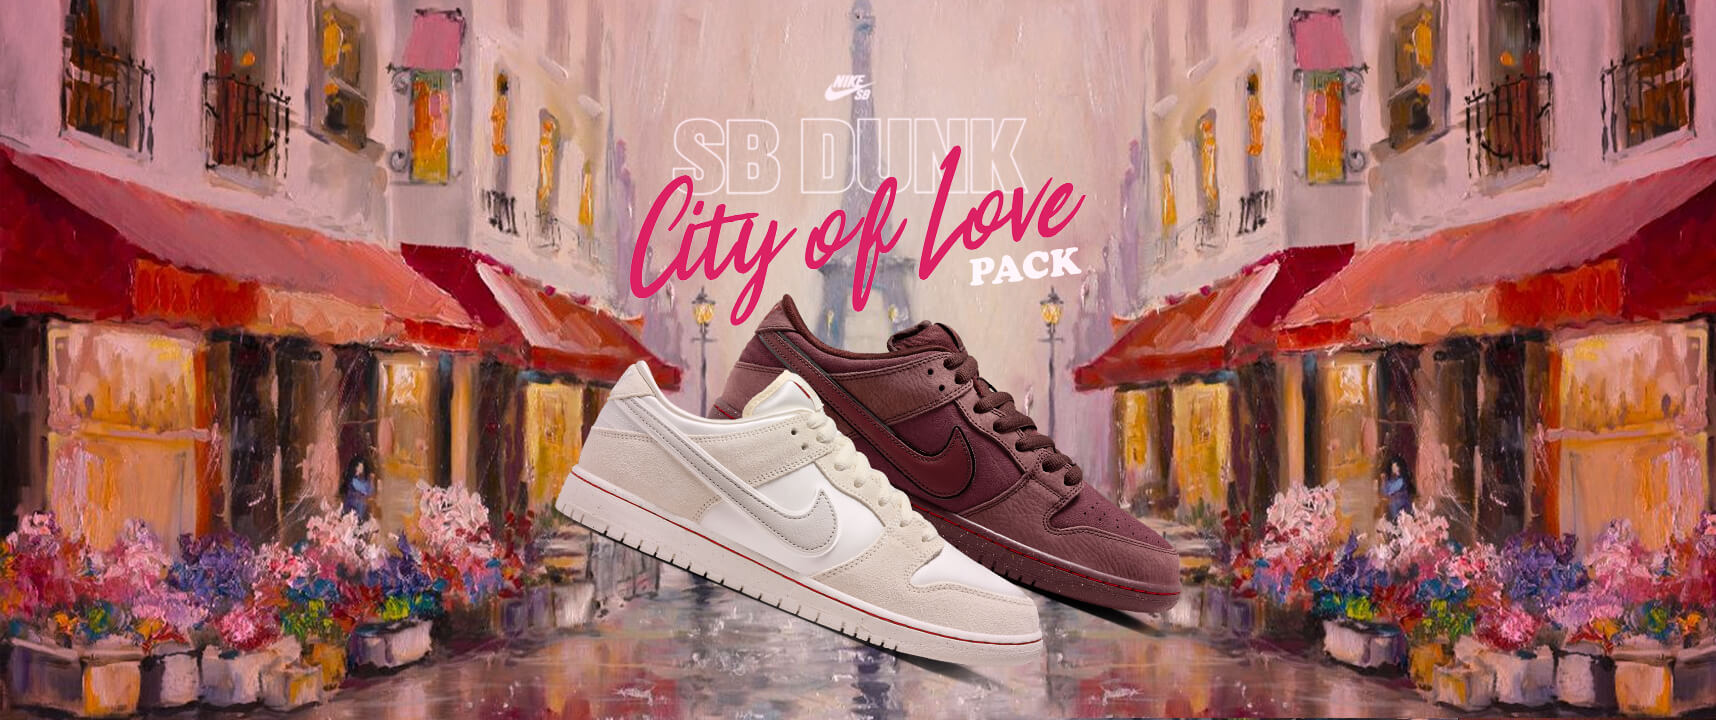 Nike SB City of Love Collection - SB Dunk & Apparel online store at ARROW & BEAST